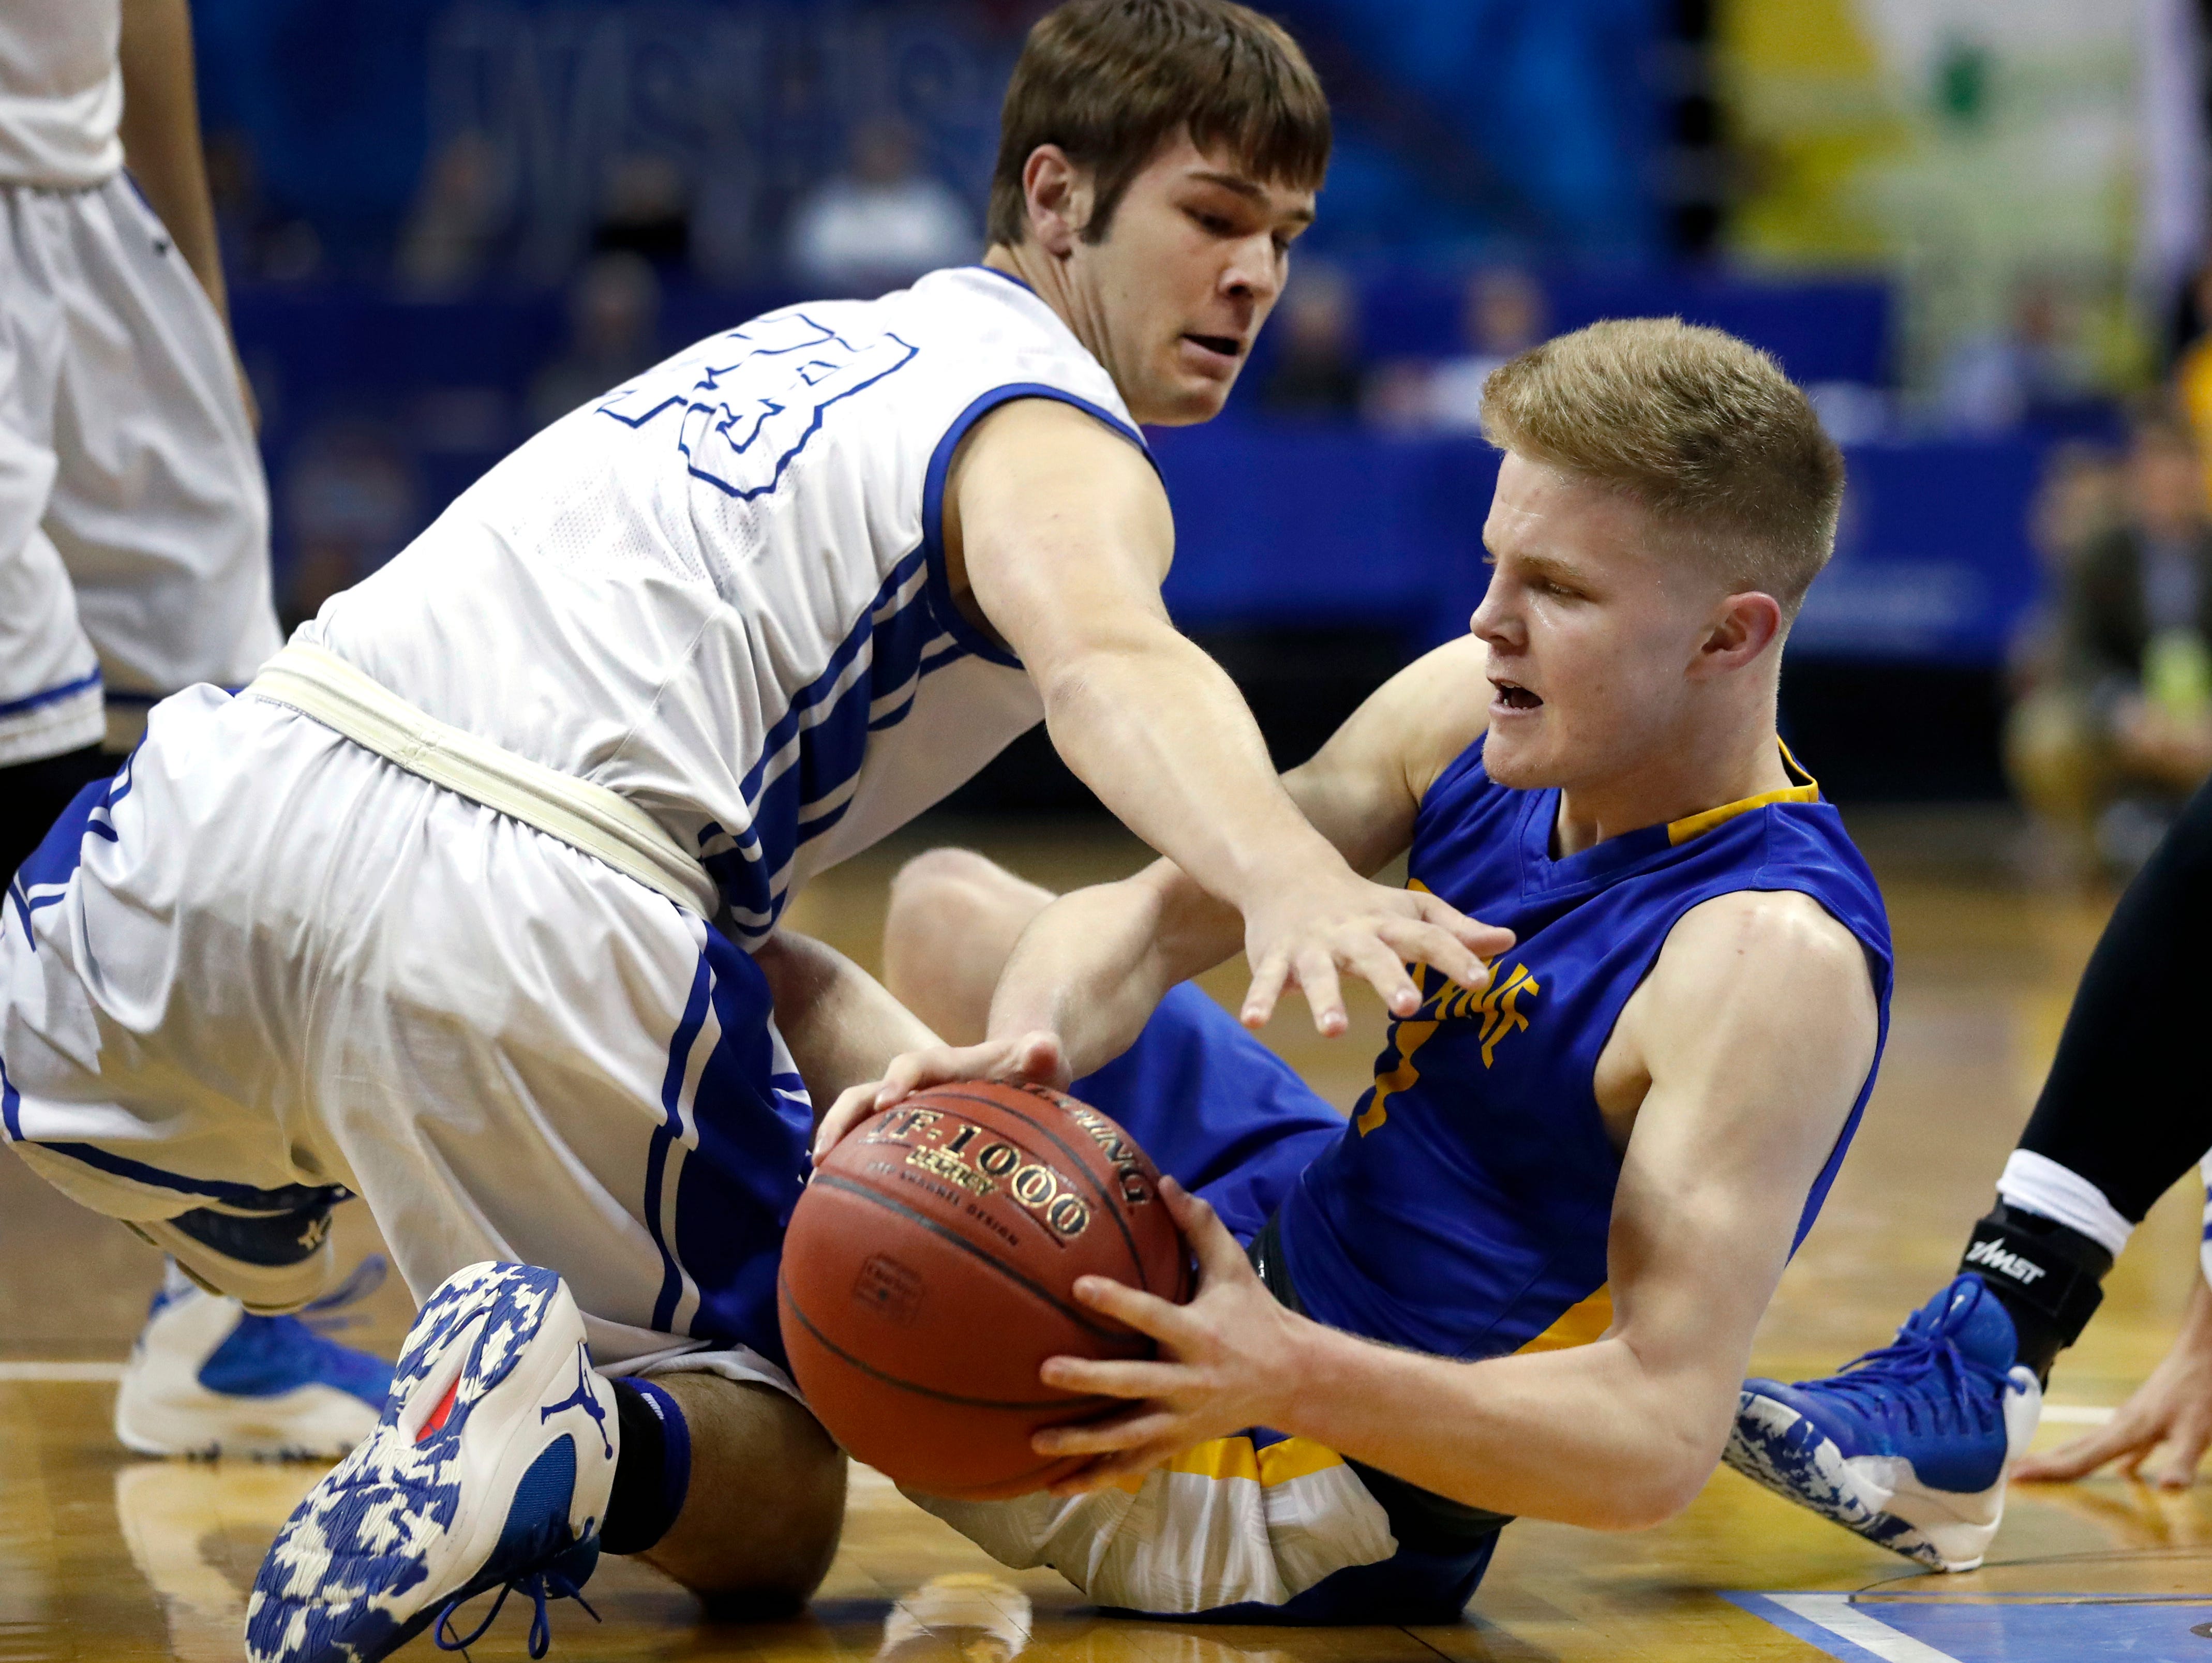 Crane's Dalton Hayes, right, and Oran's Drew Reischman scramble for a loose ball during the first half of the Missouri Class 2 boys high school championship basketball game Saturday, March 11, 2017, in Columbia, Mo.